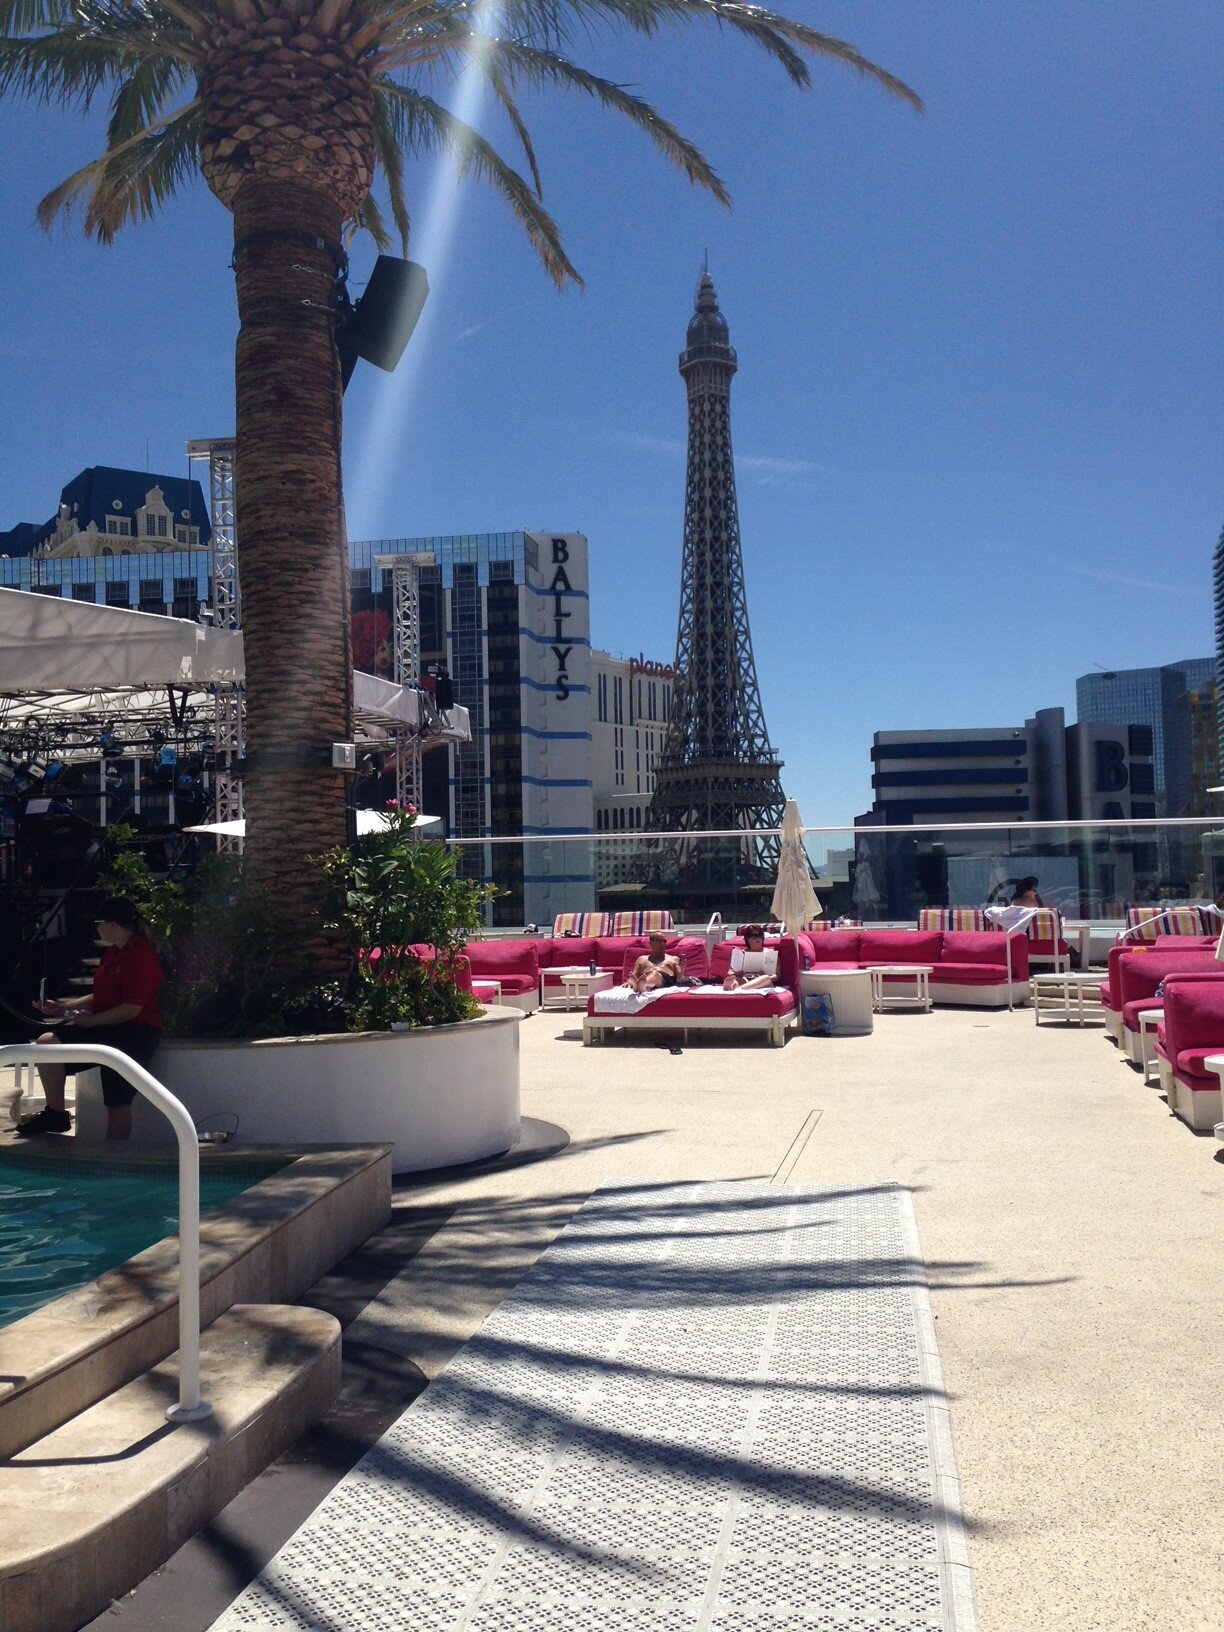 Las Vegas Travel Guide - Top things to do when in Las Vegas - Drais pool at The Cromwell Hotel